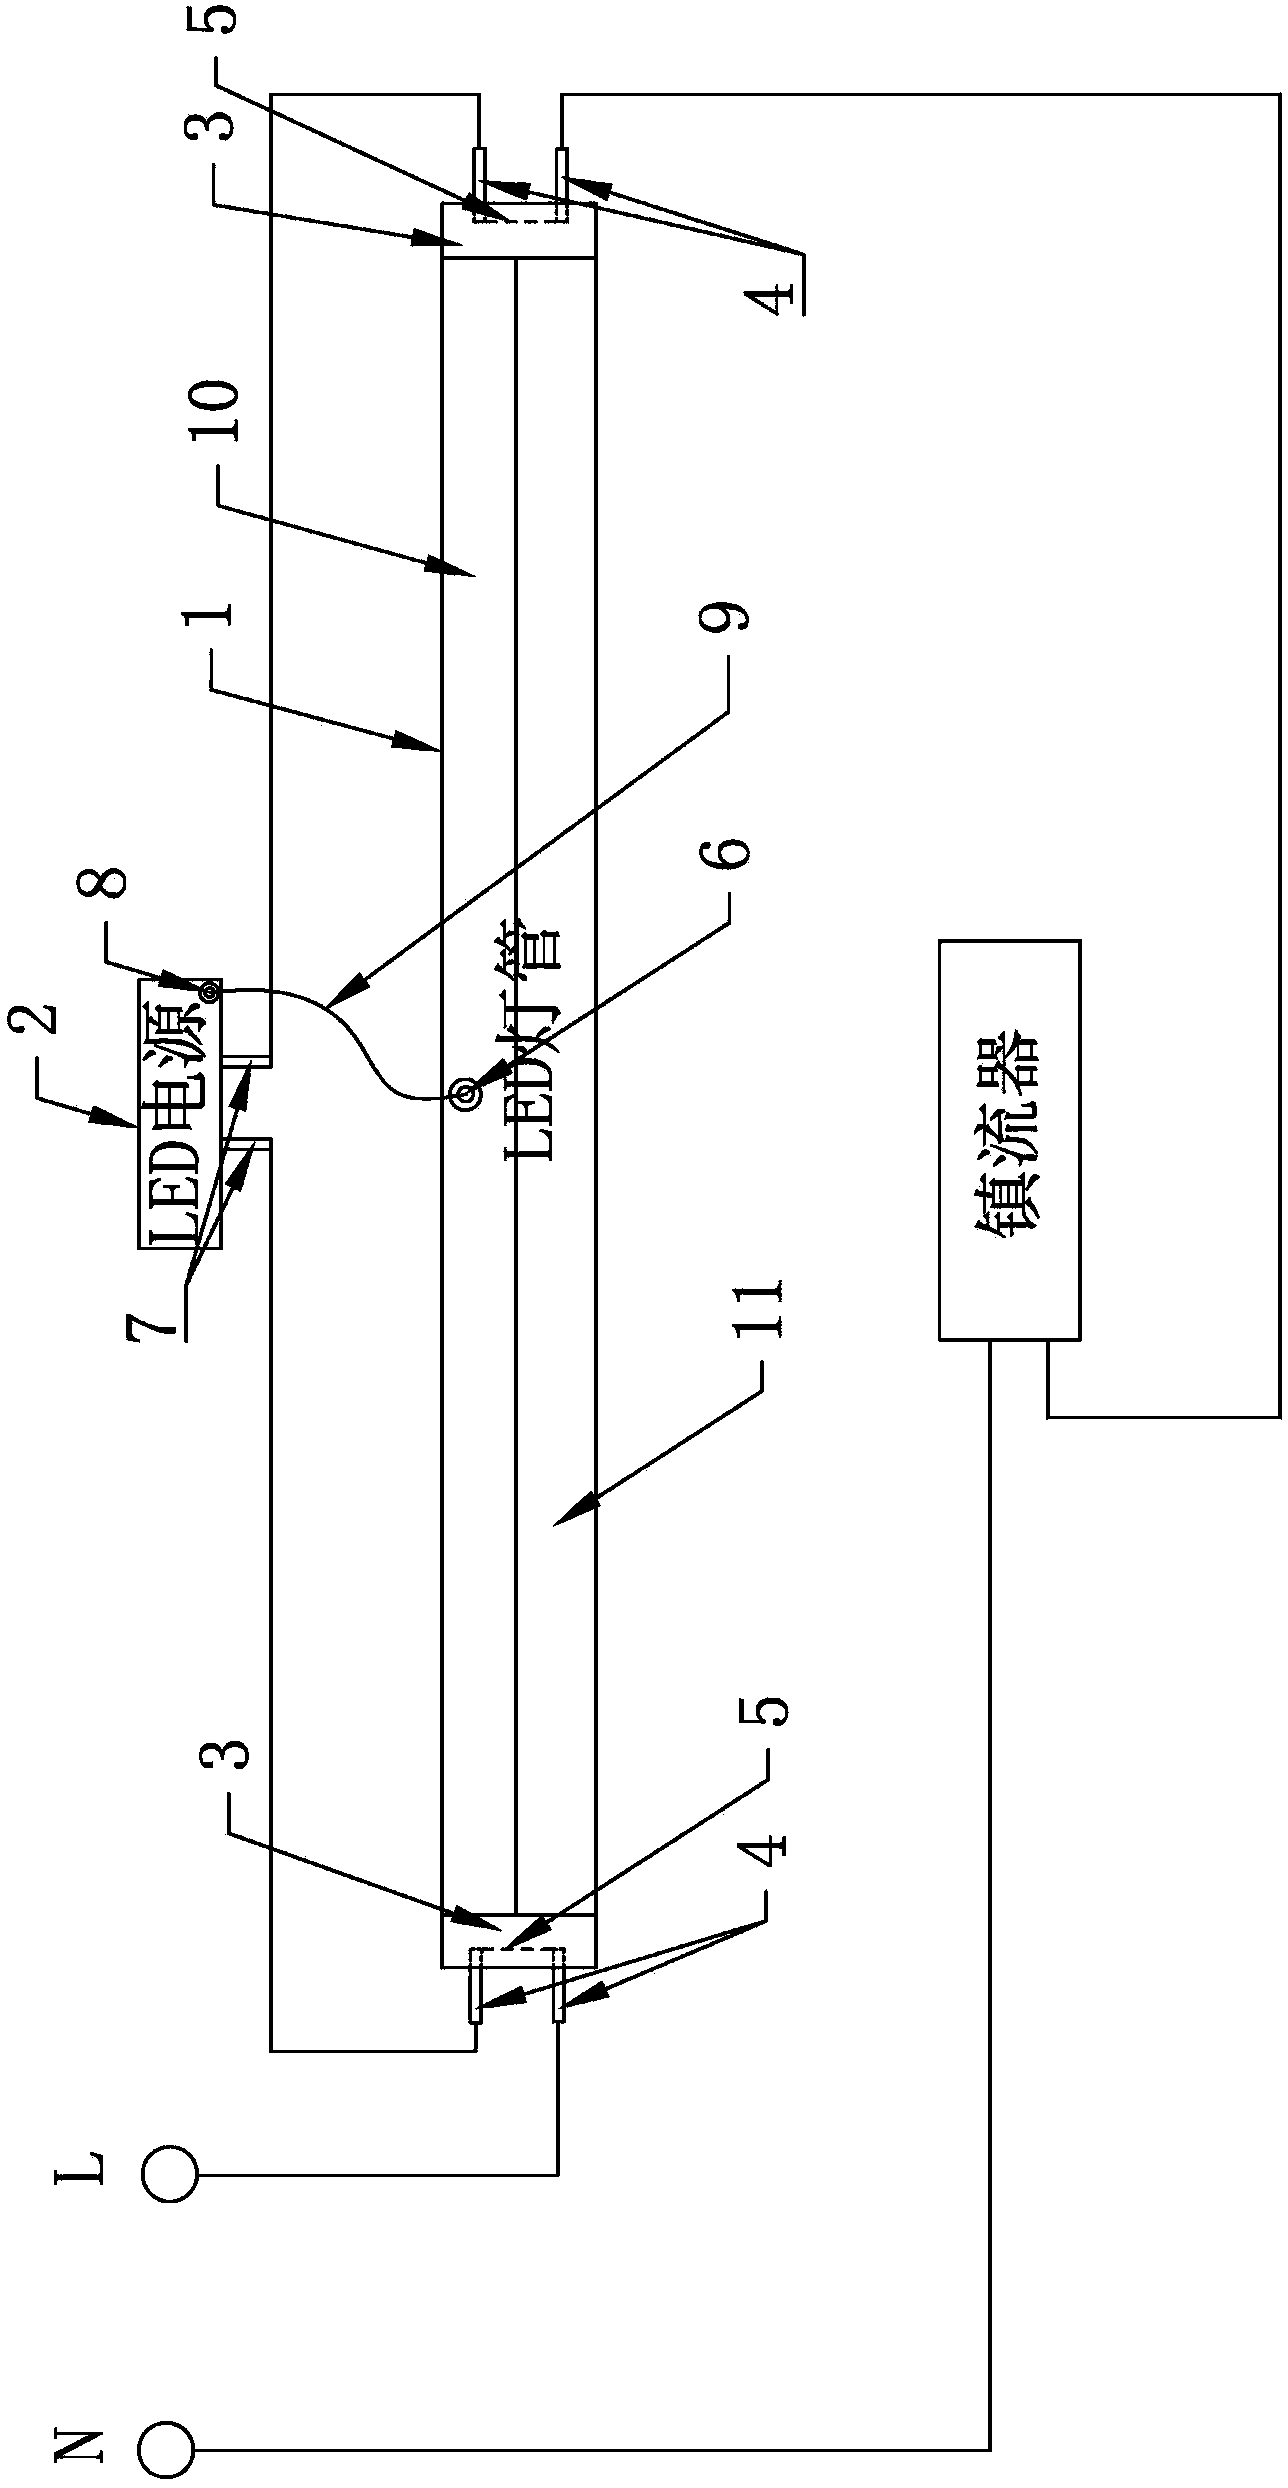 LED daylight lamp device capable of directly replacing fluorescent lamp